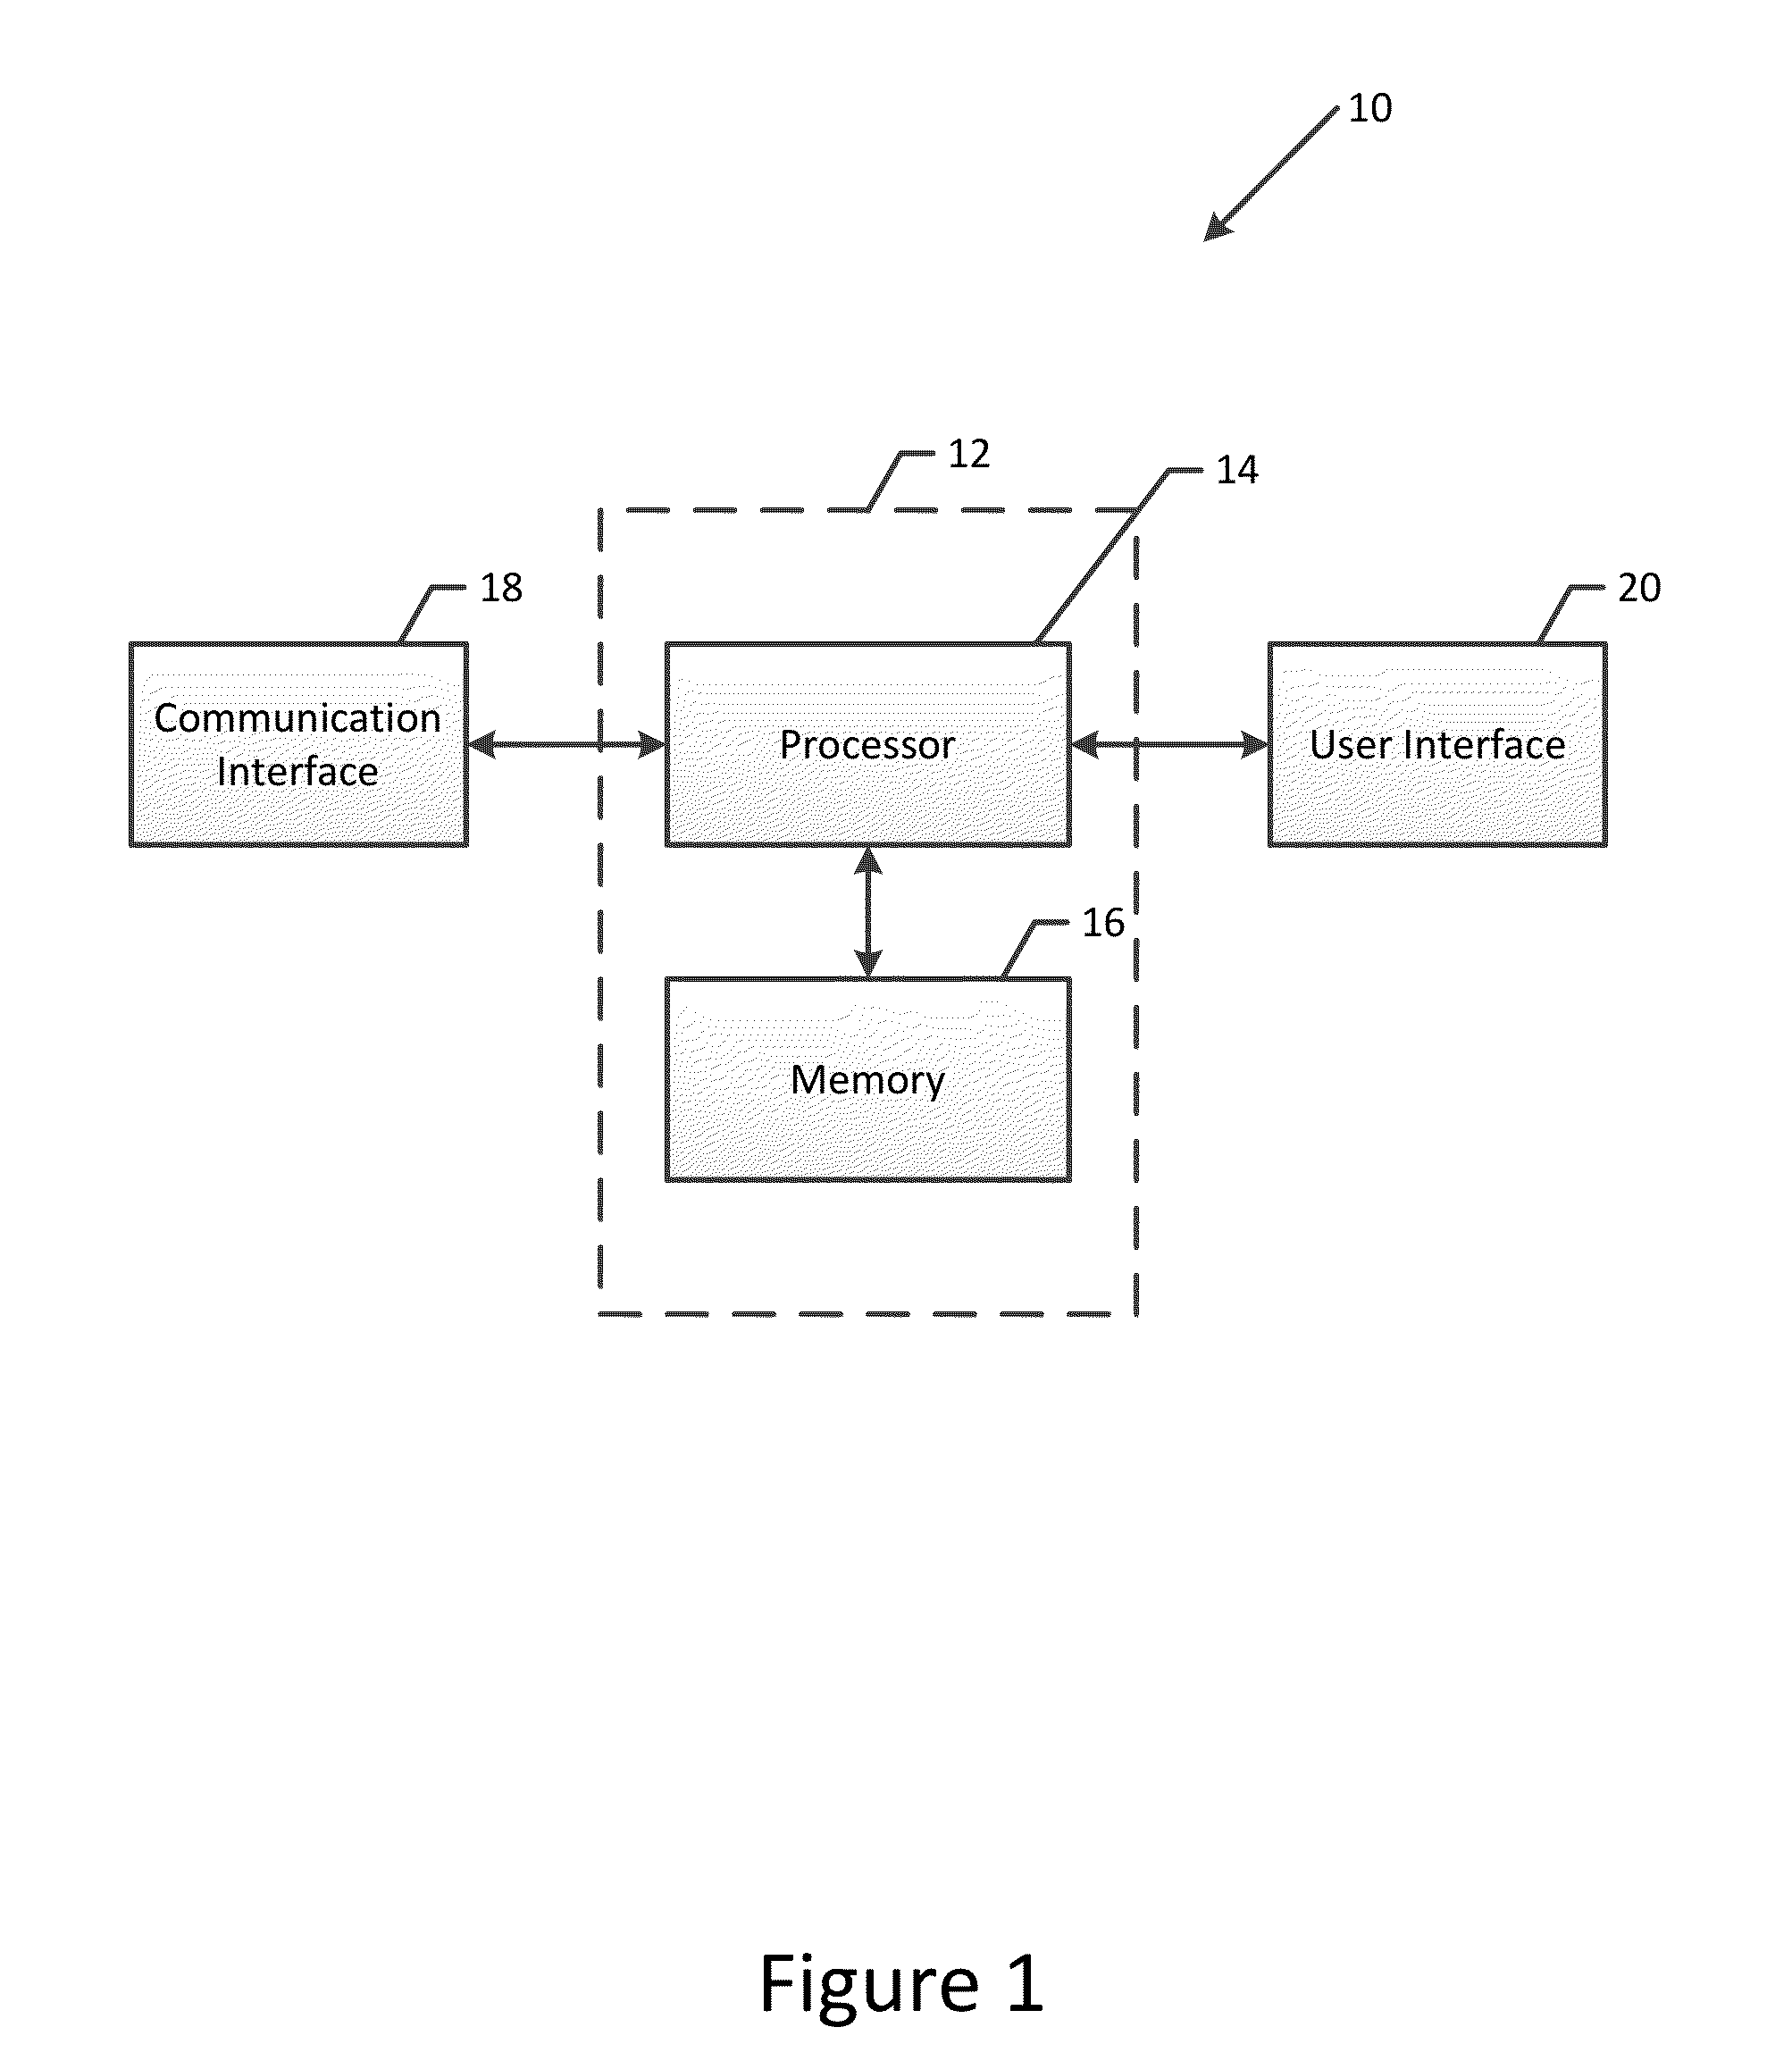 Method and computing device for providing medication information in conjunction with an electronic health record